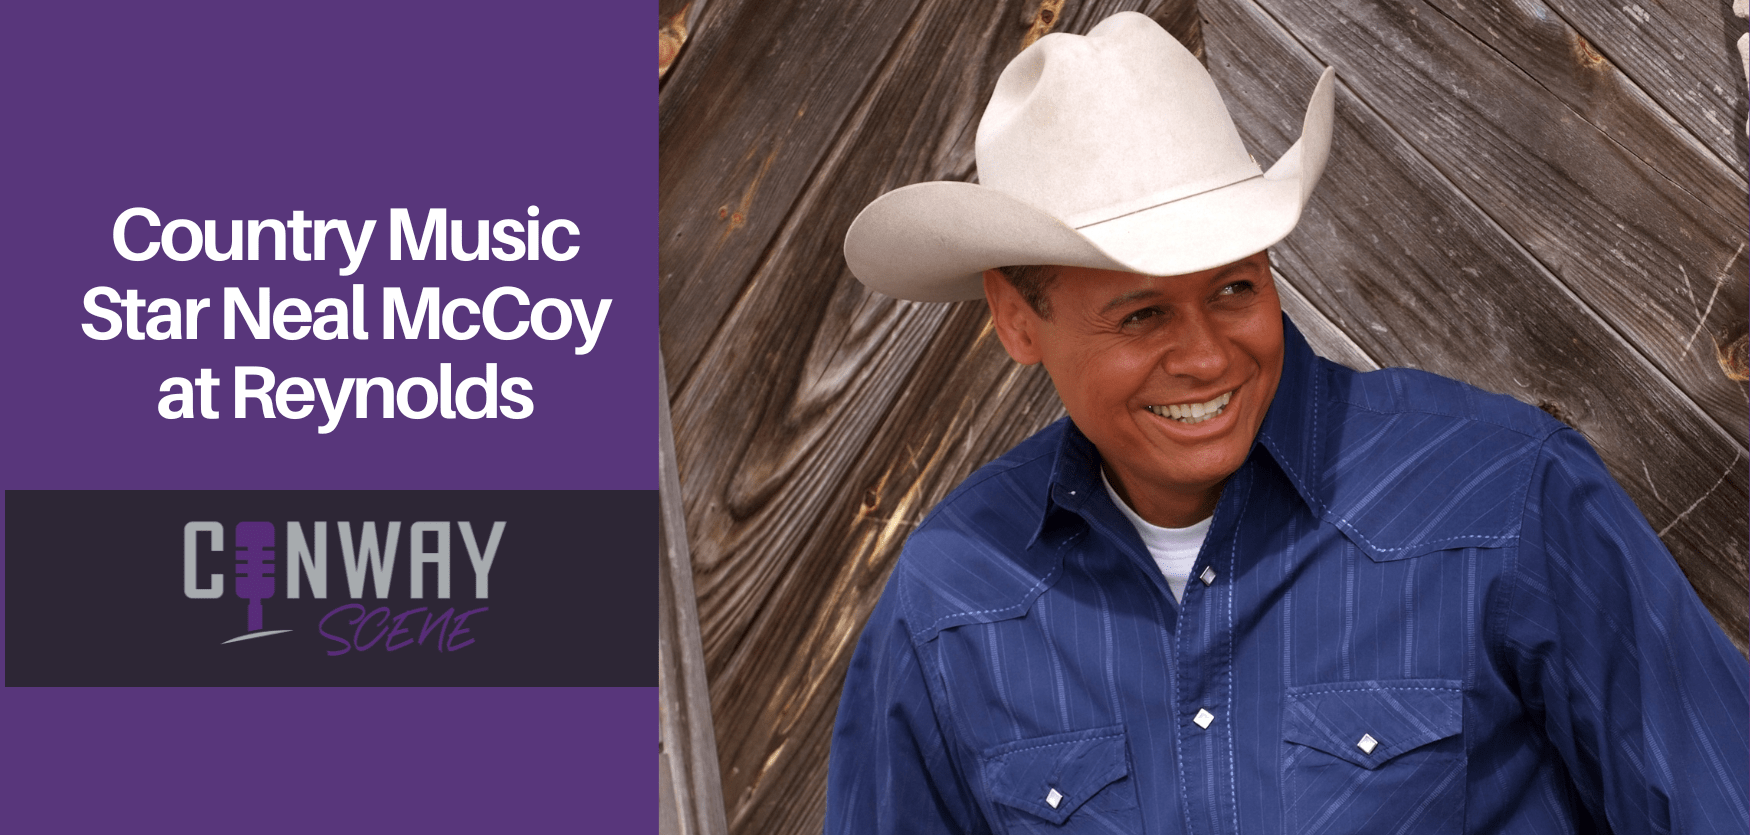 Country Music Star Neal McCoy